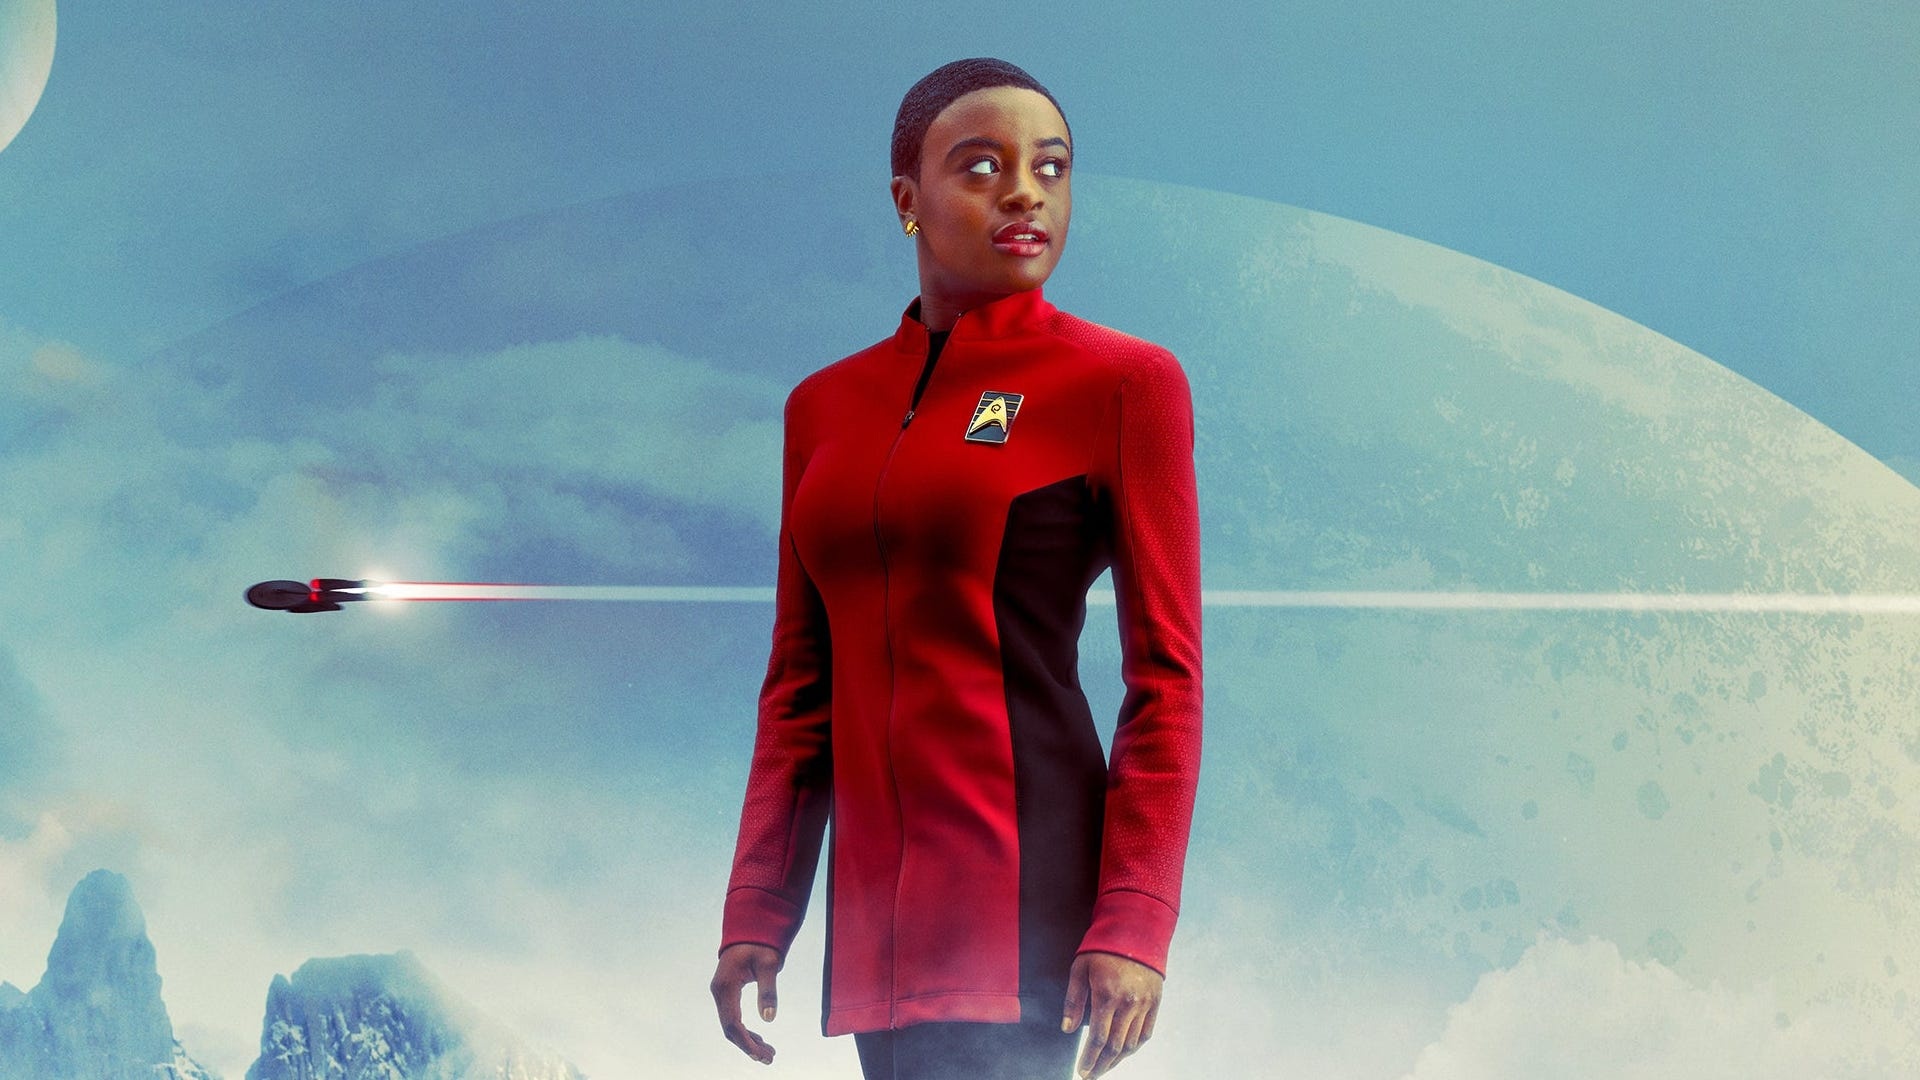 Star Trek: Strange New Worlds, Watch recommendations, Prepare for premiere, Exciting countdown, 1920x1080 Full HD Desktop